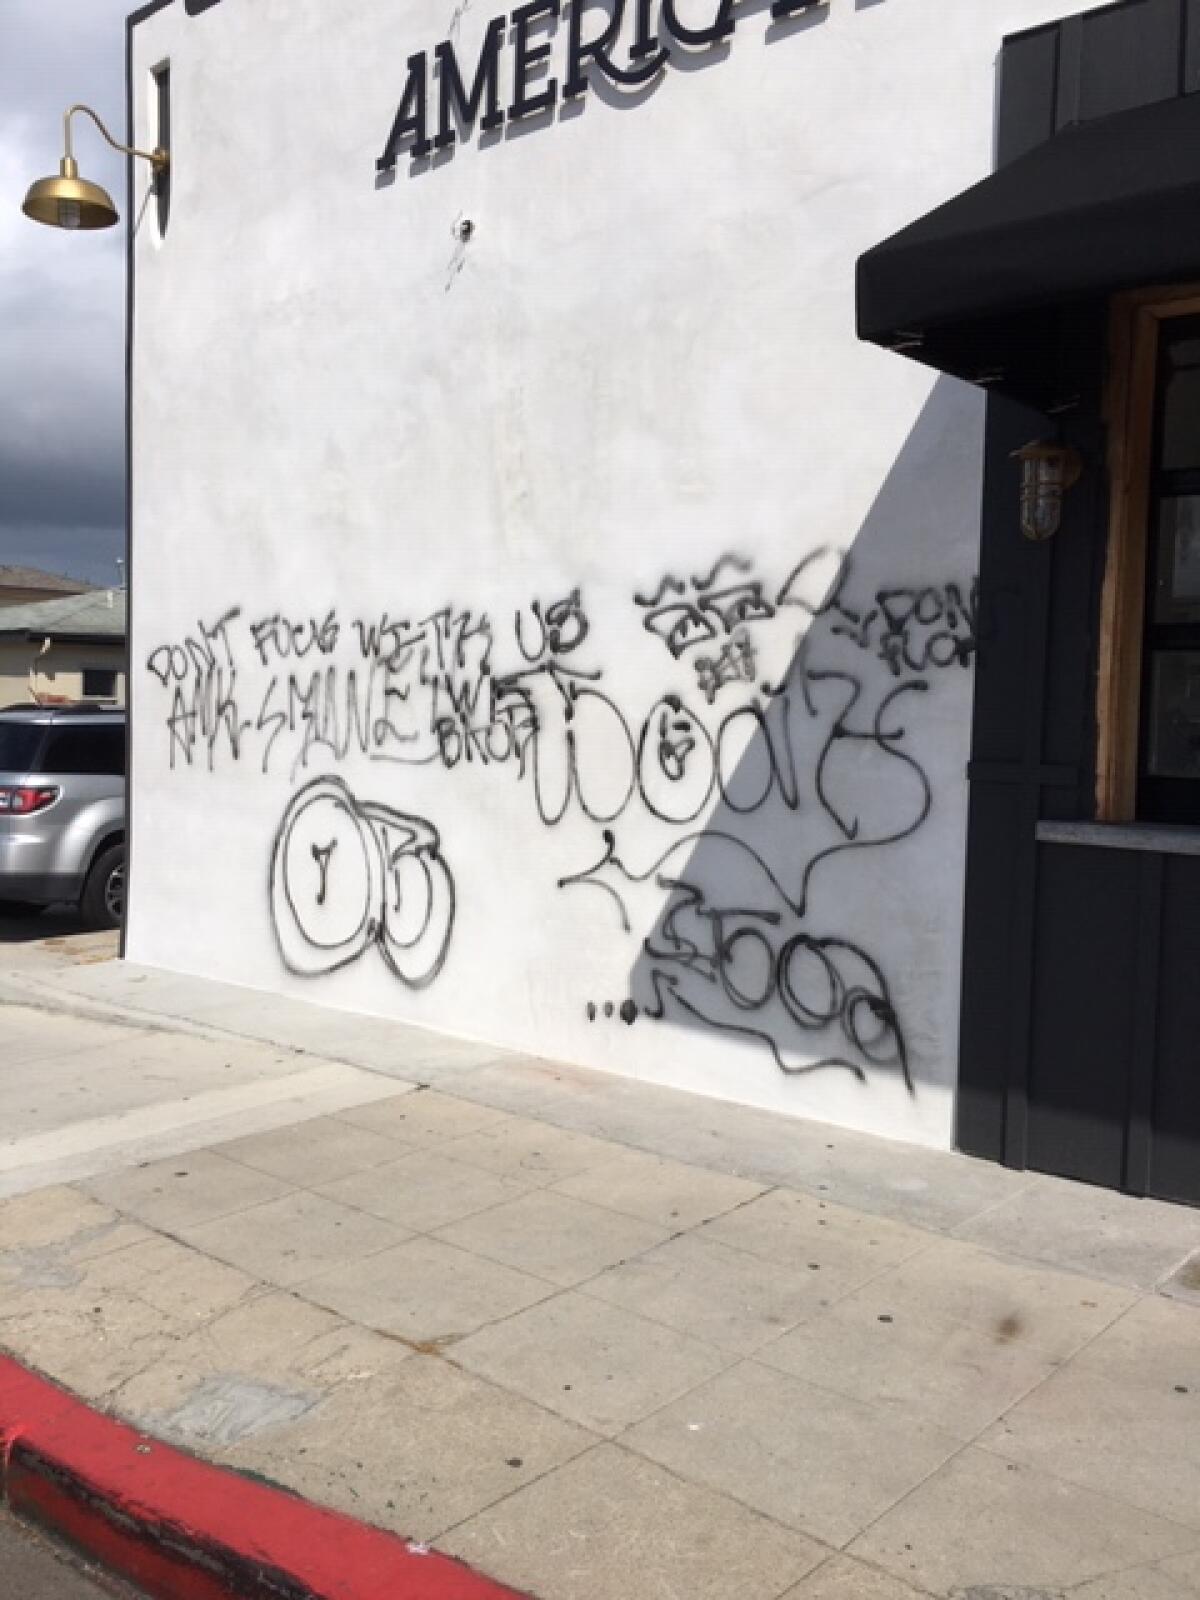 This is one of several instances of graffiti seen along Coast Boulevard on Monday, April 20.